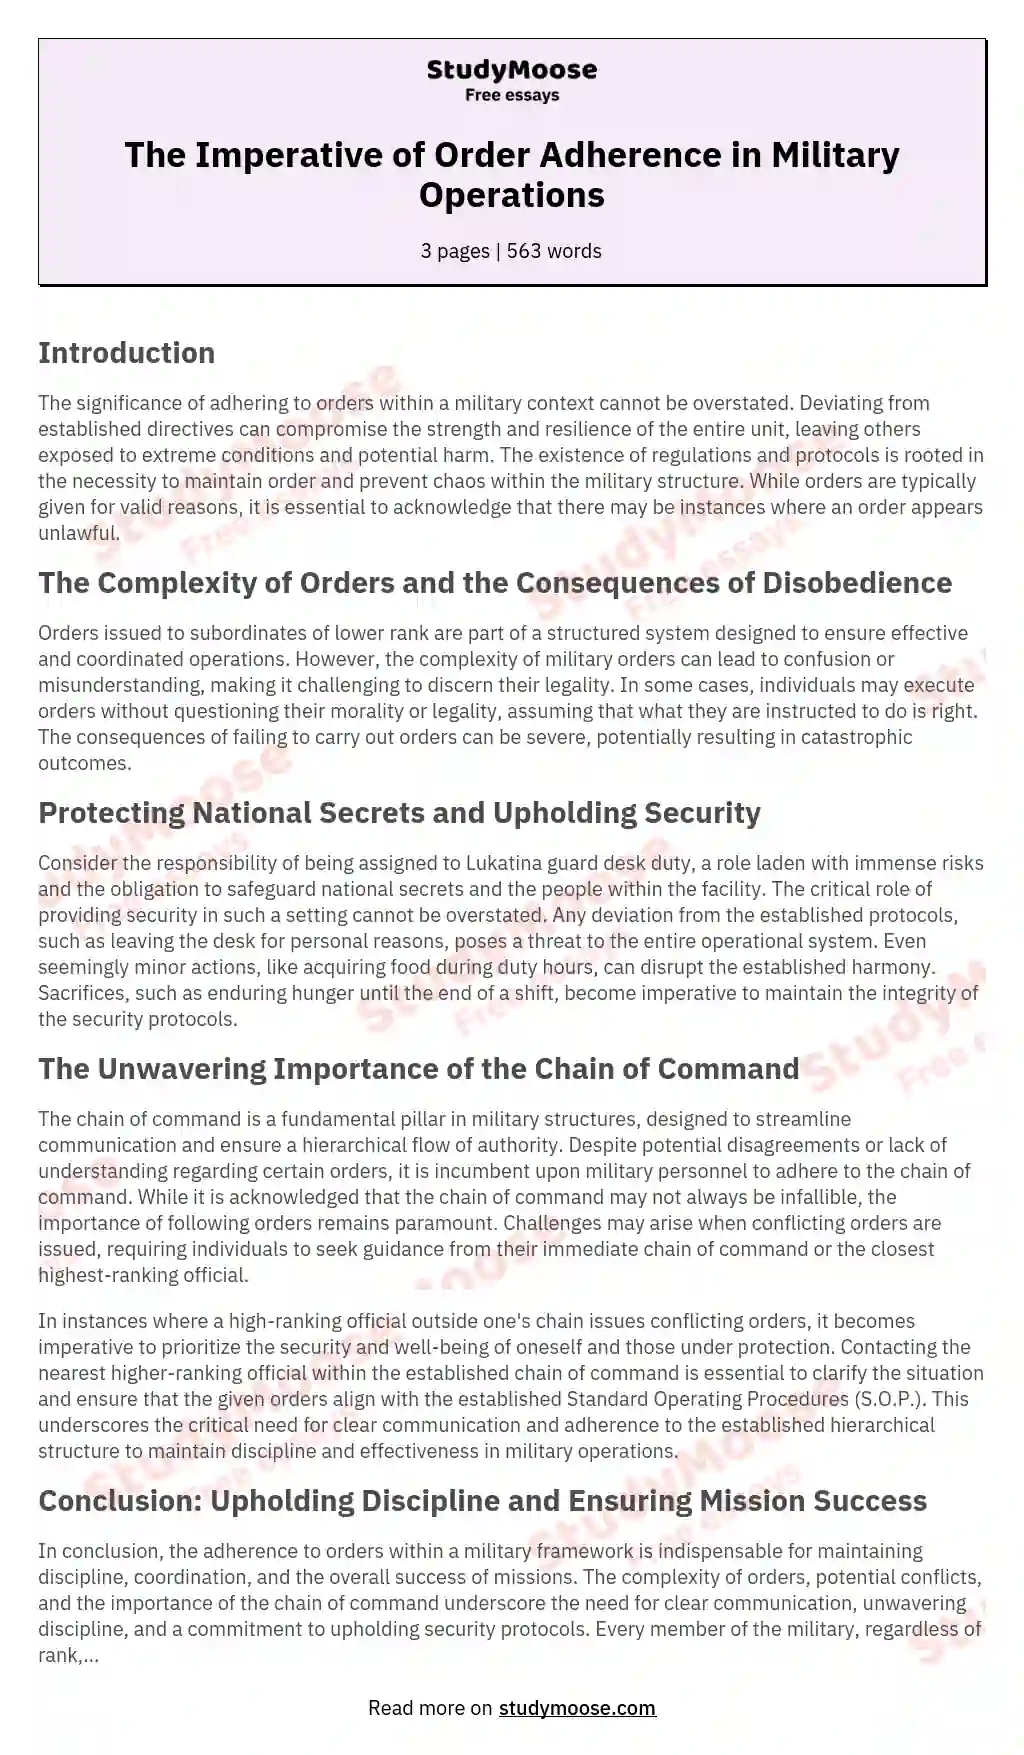 The Imperative of Order Adherence in Military Operations essay